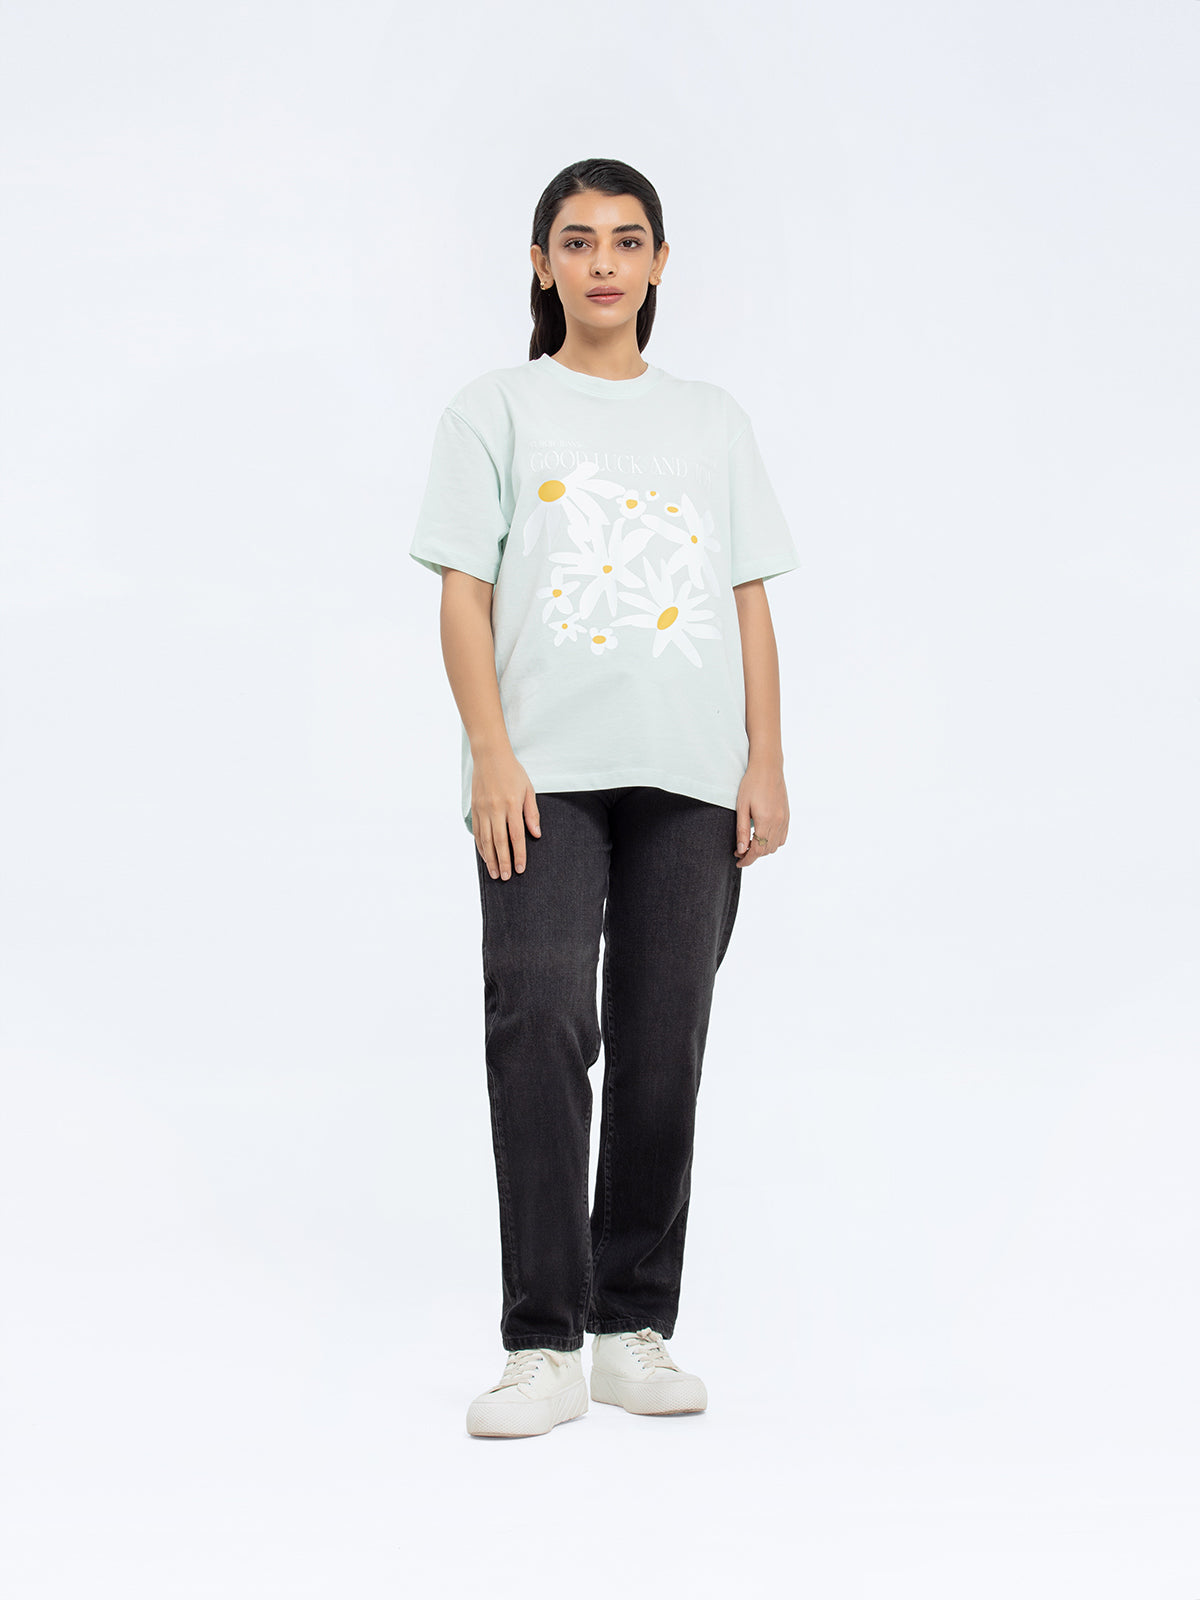 Boxy Fit Graphic Tee - FWTGT24-075